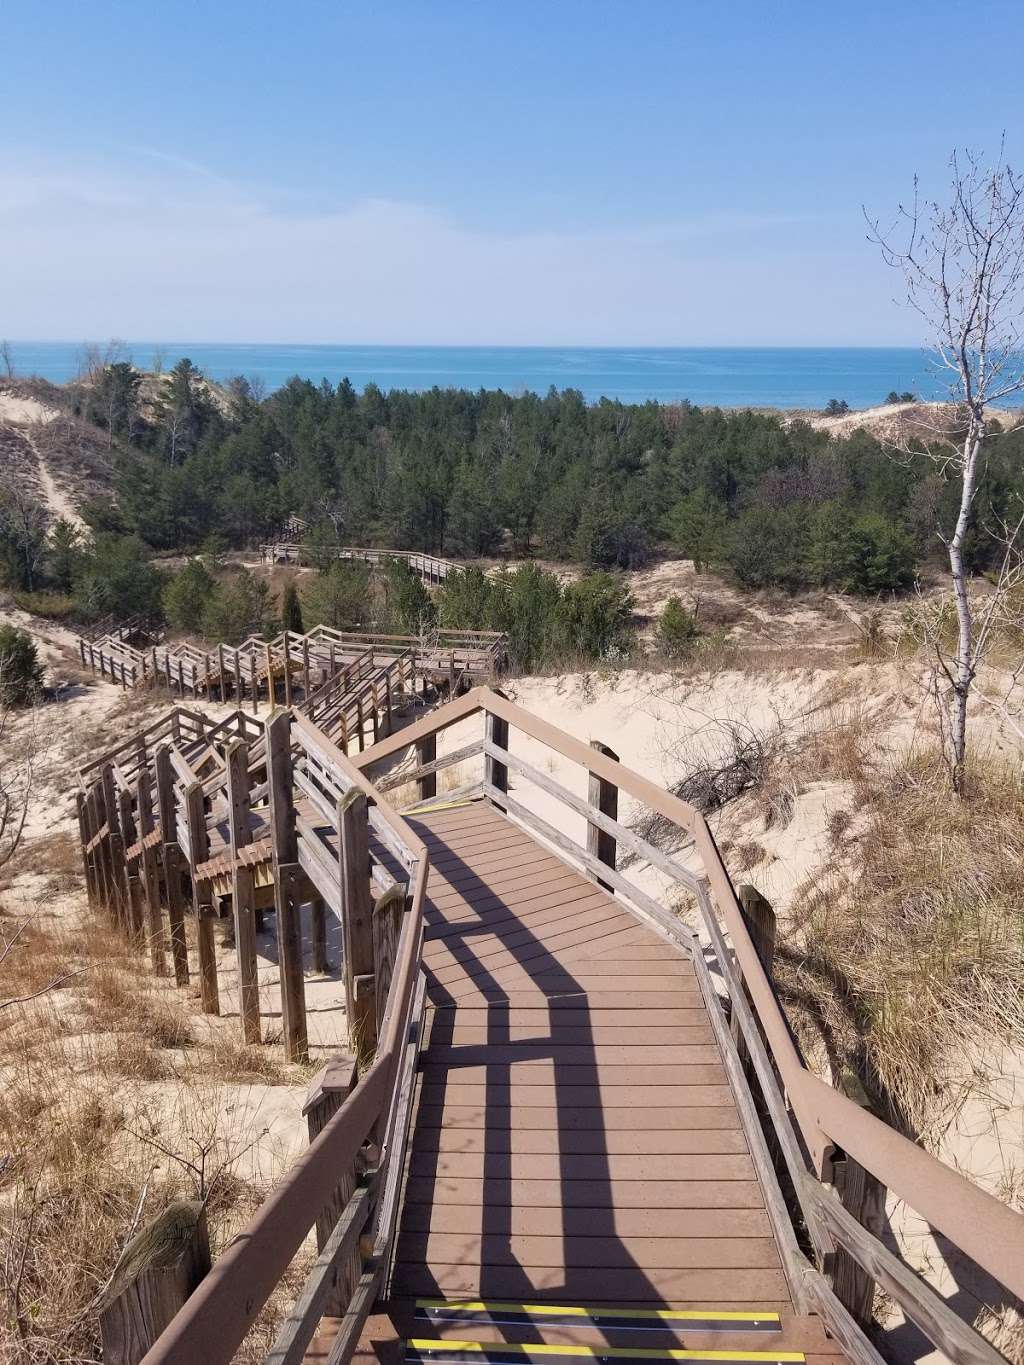 West Beach - Indiana Dunes National Lakeshore | 376 N County Line Rd, Gary, IN 46403 | Phone: (219) 395-1882